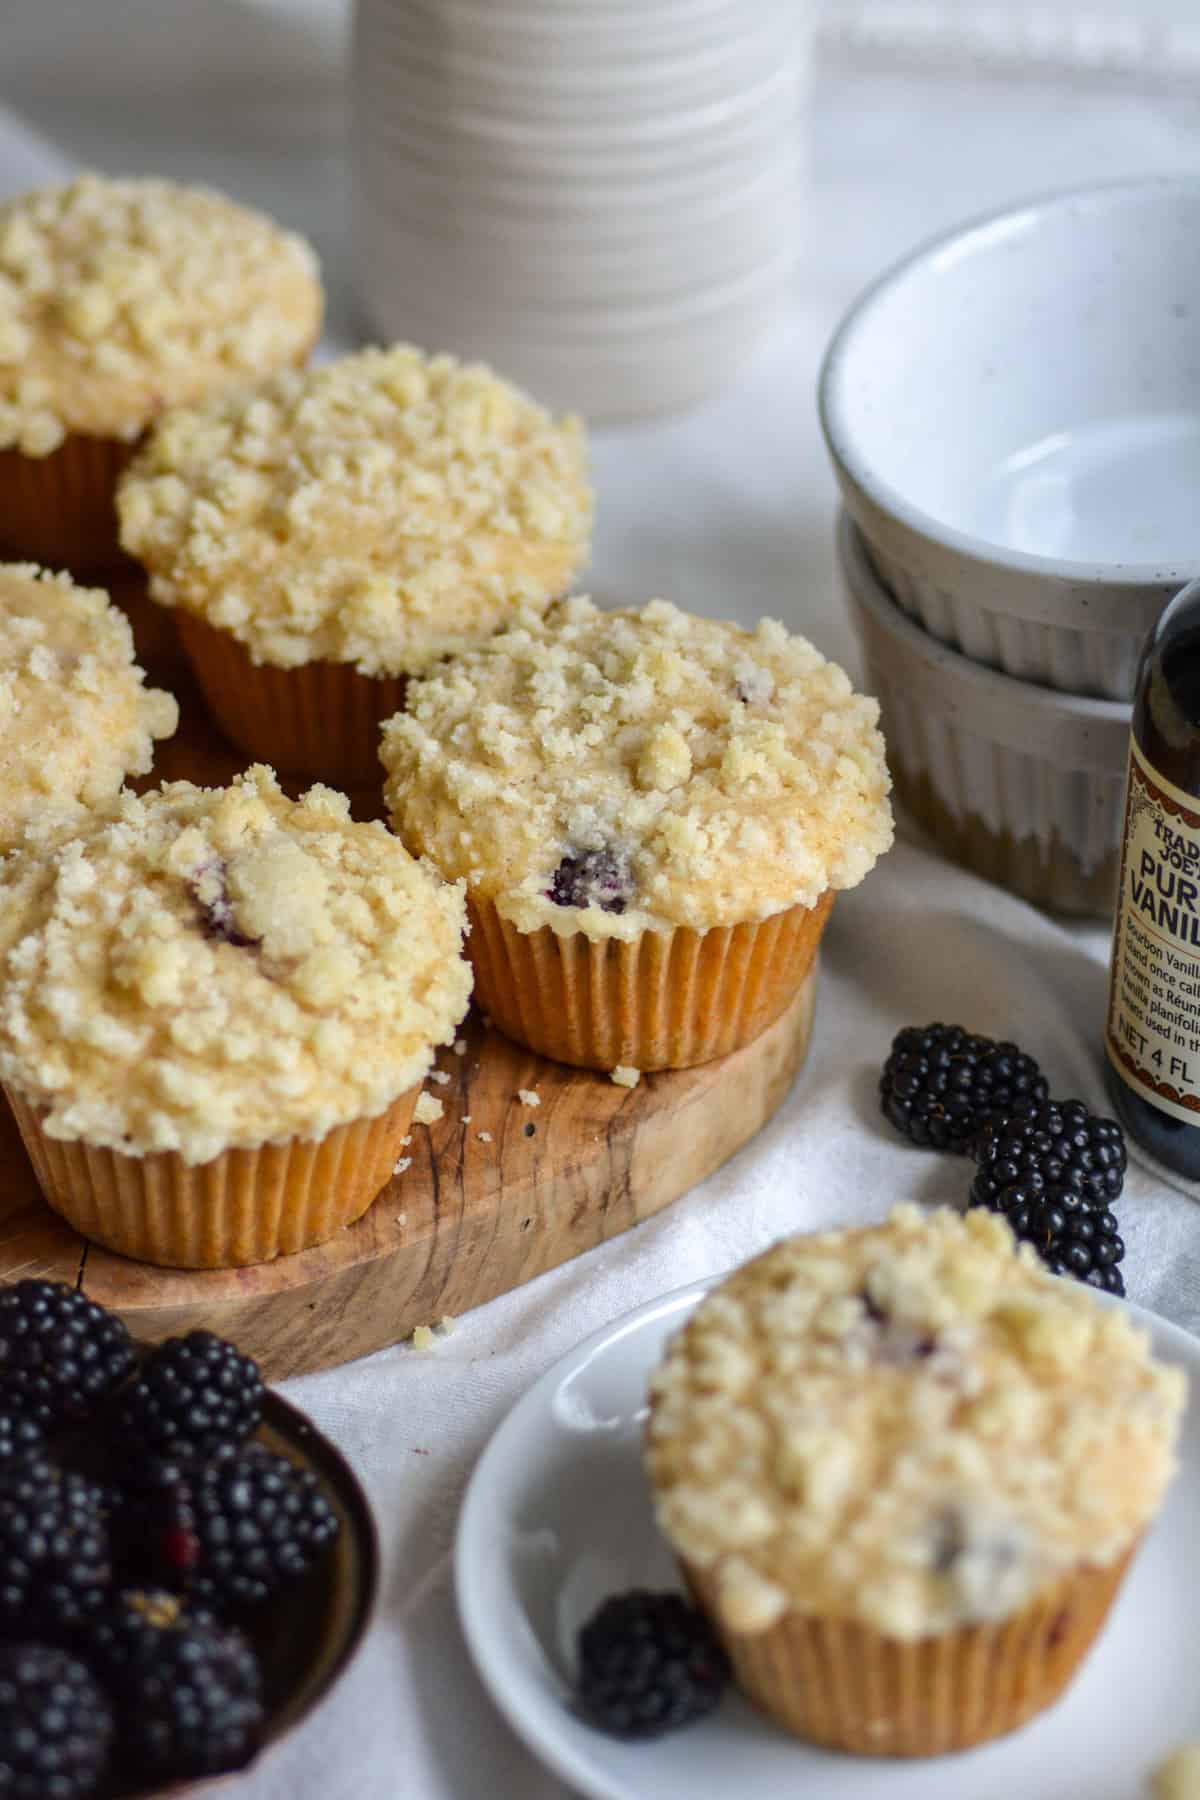 Vegan Blackberry muffins on a small wooden board with a muffin on a plate in the foreground.